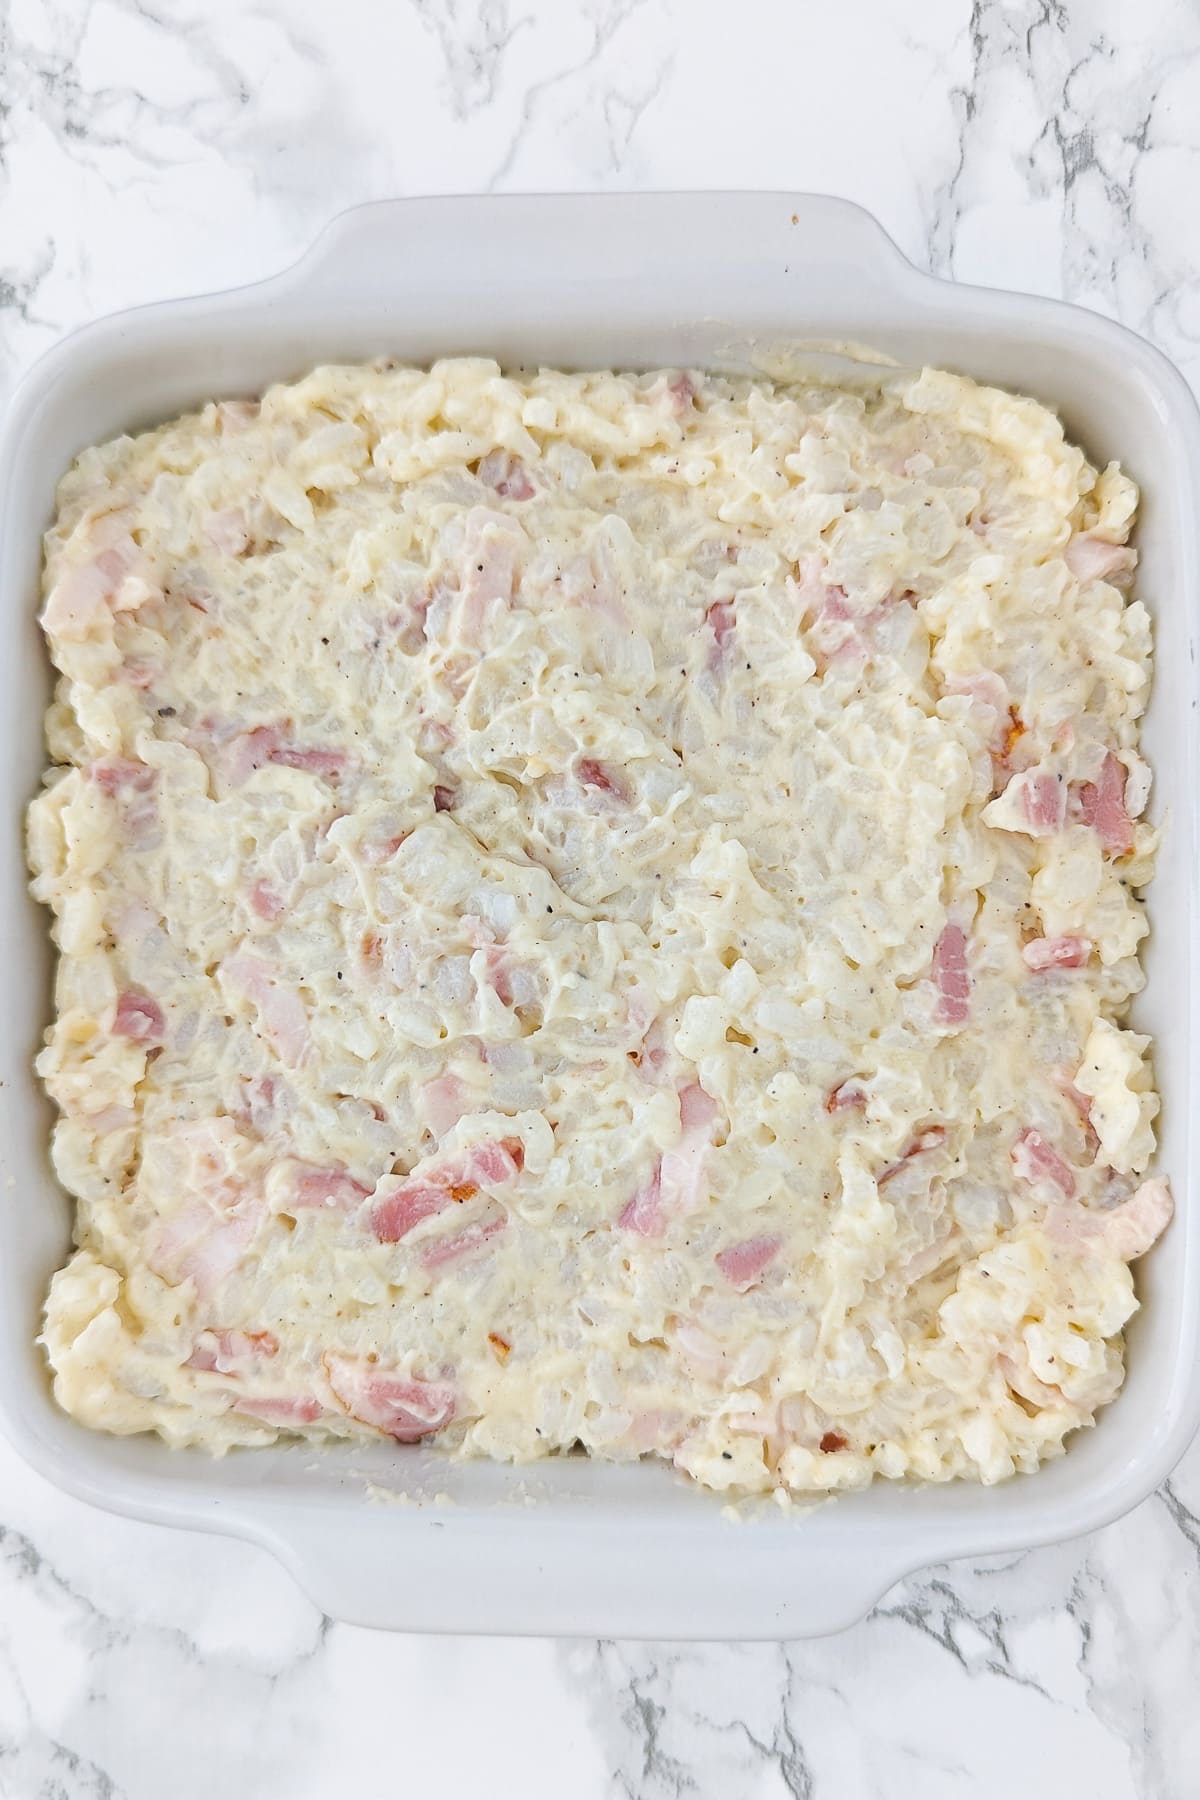 White baking dish filled with a mix of ham and rice on a white marble table.